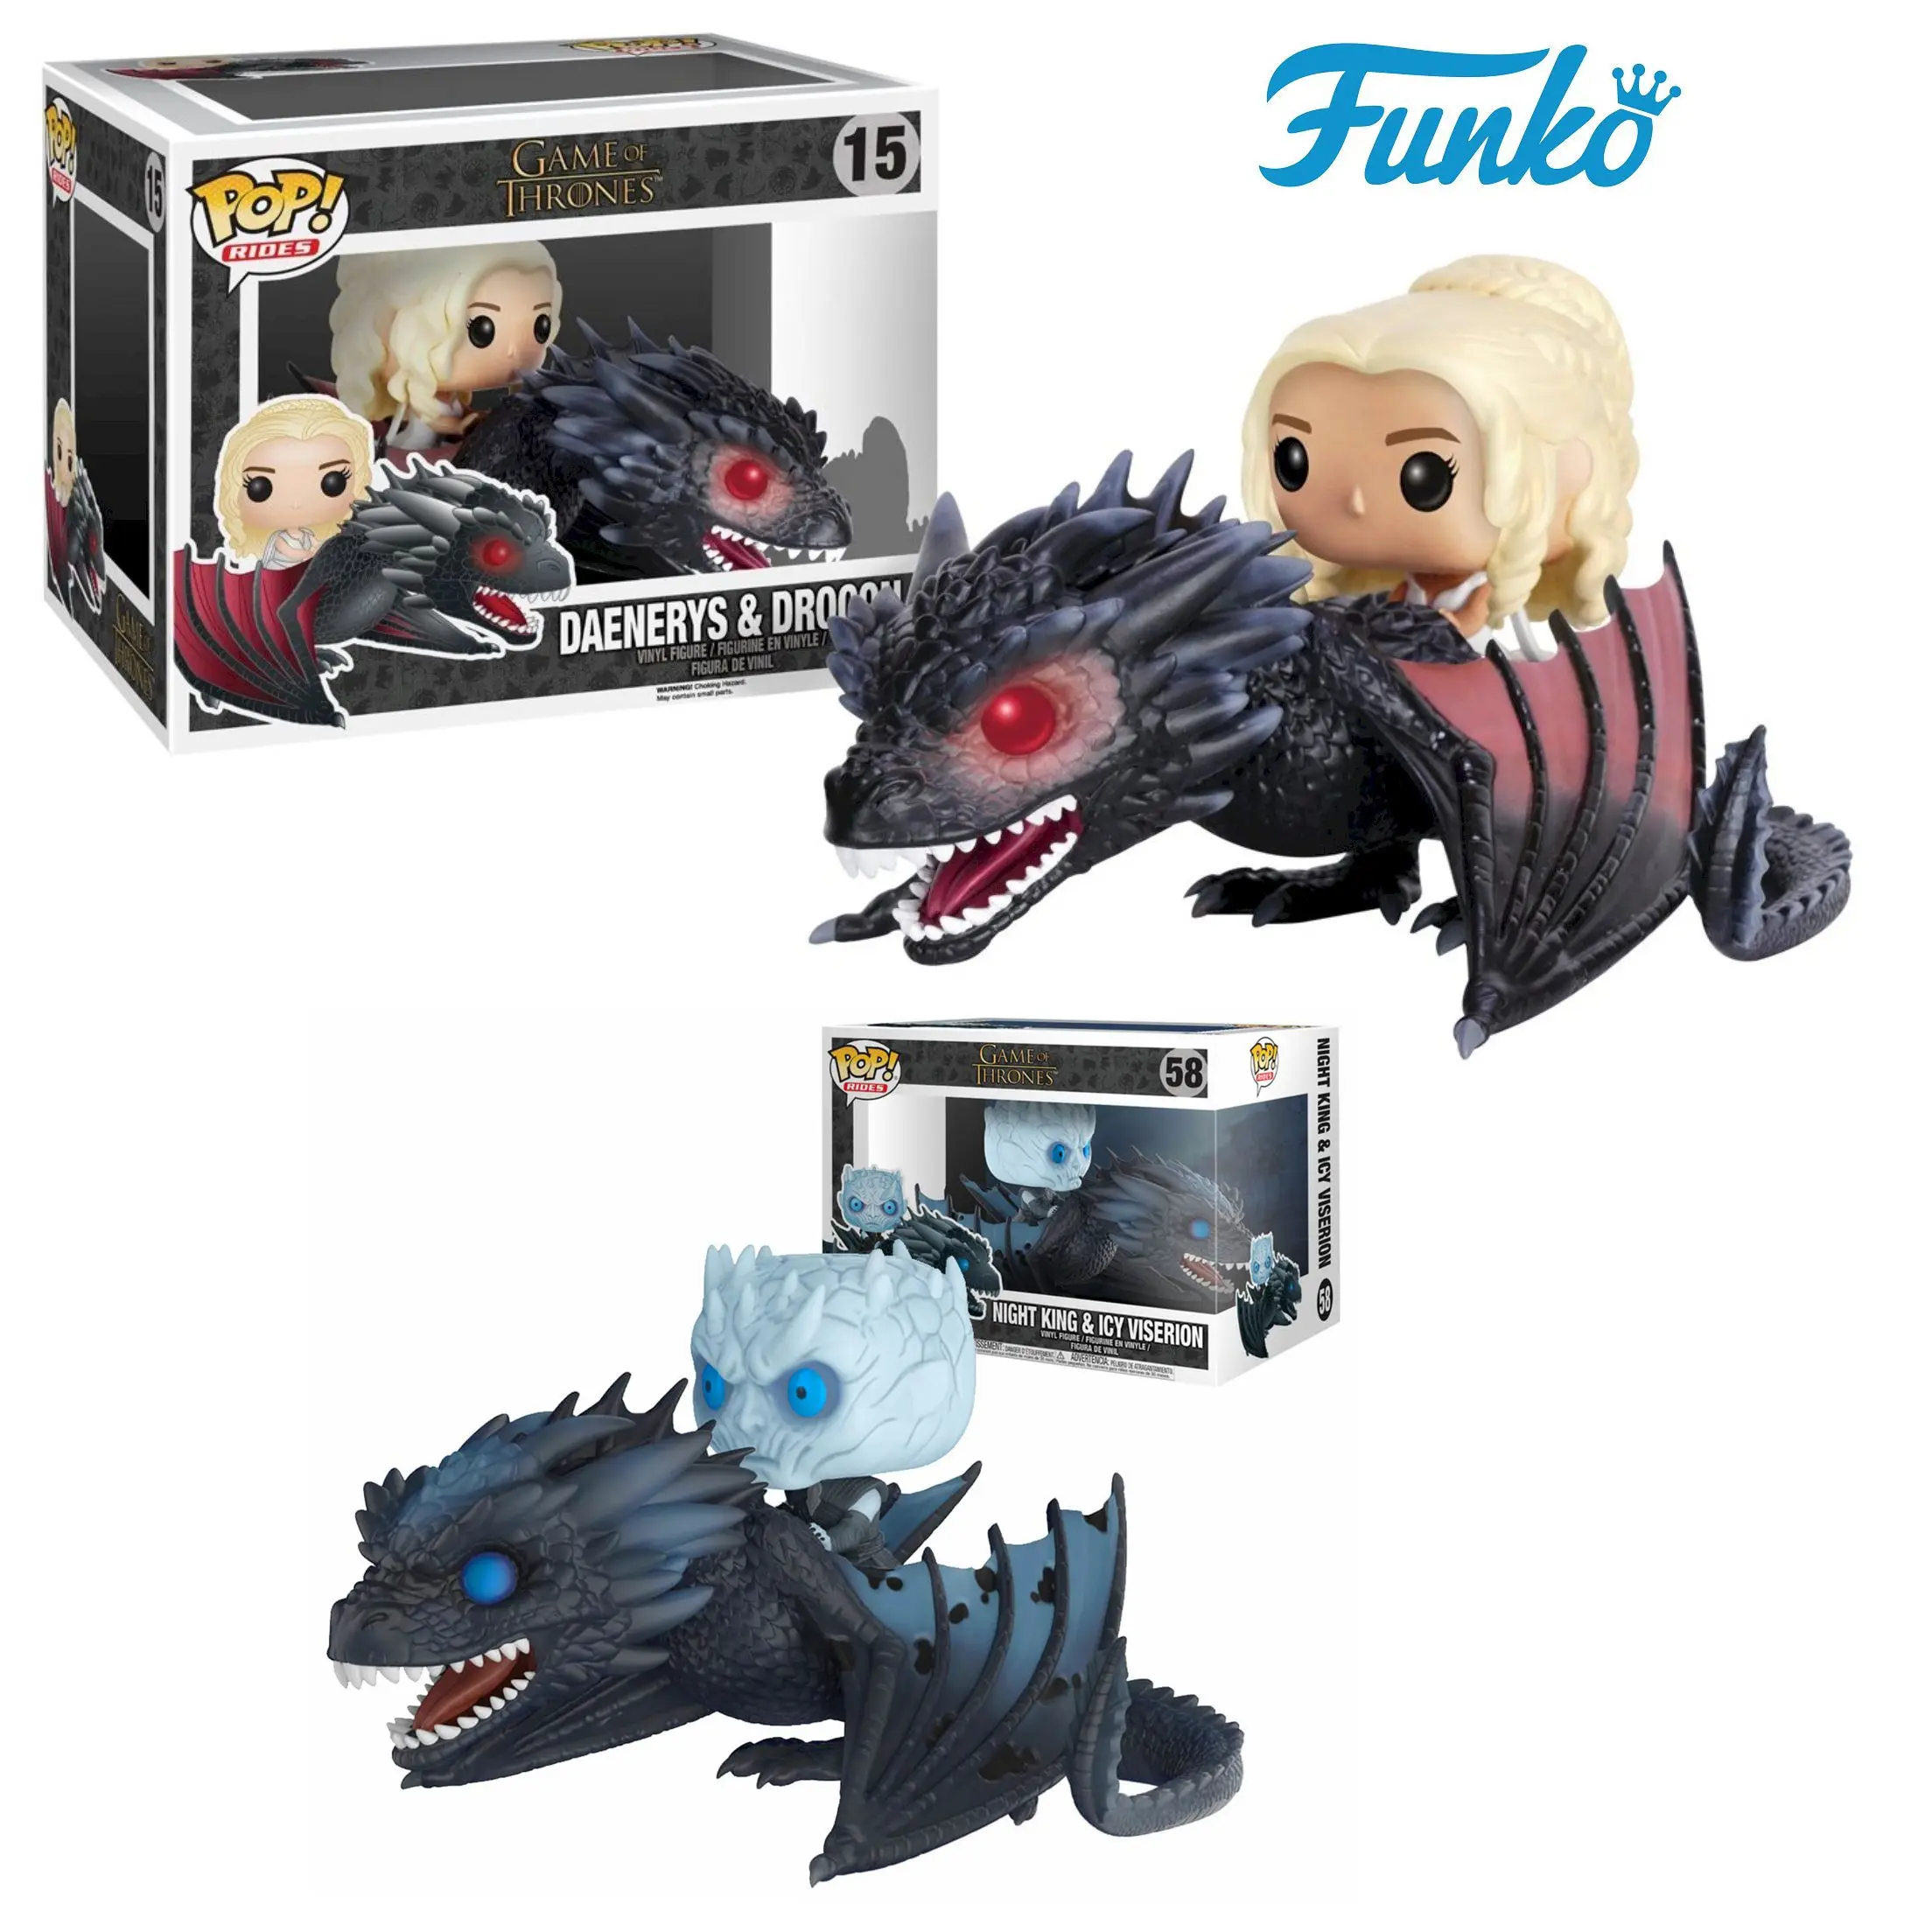 Læge lov kan ikke se Funko Pop Movie Tv Game Of Thrones Night King & Icy Viserion 58# Daenerys  Rides Drogon 15# Toy Figures Collectible Model Toy - Action Figures -  AliExpress